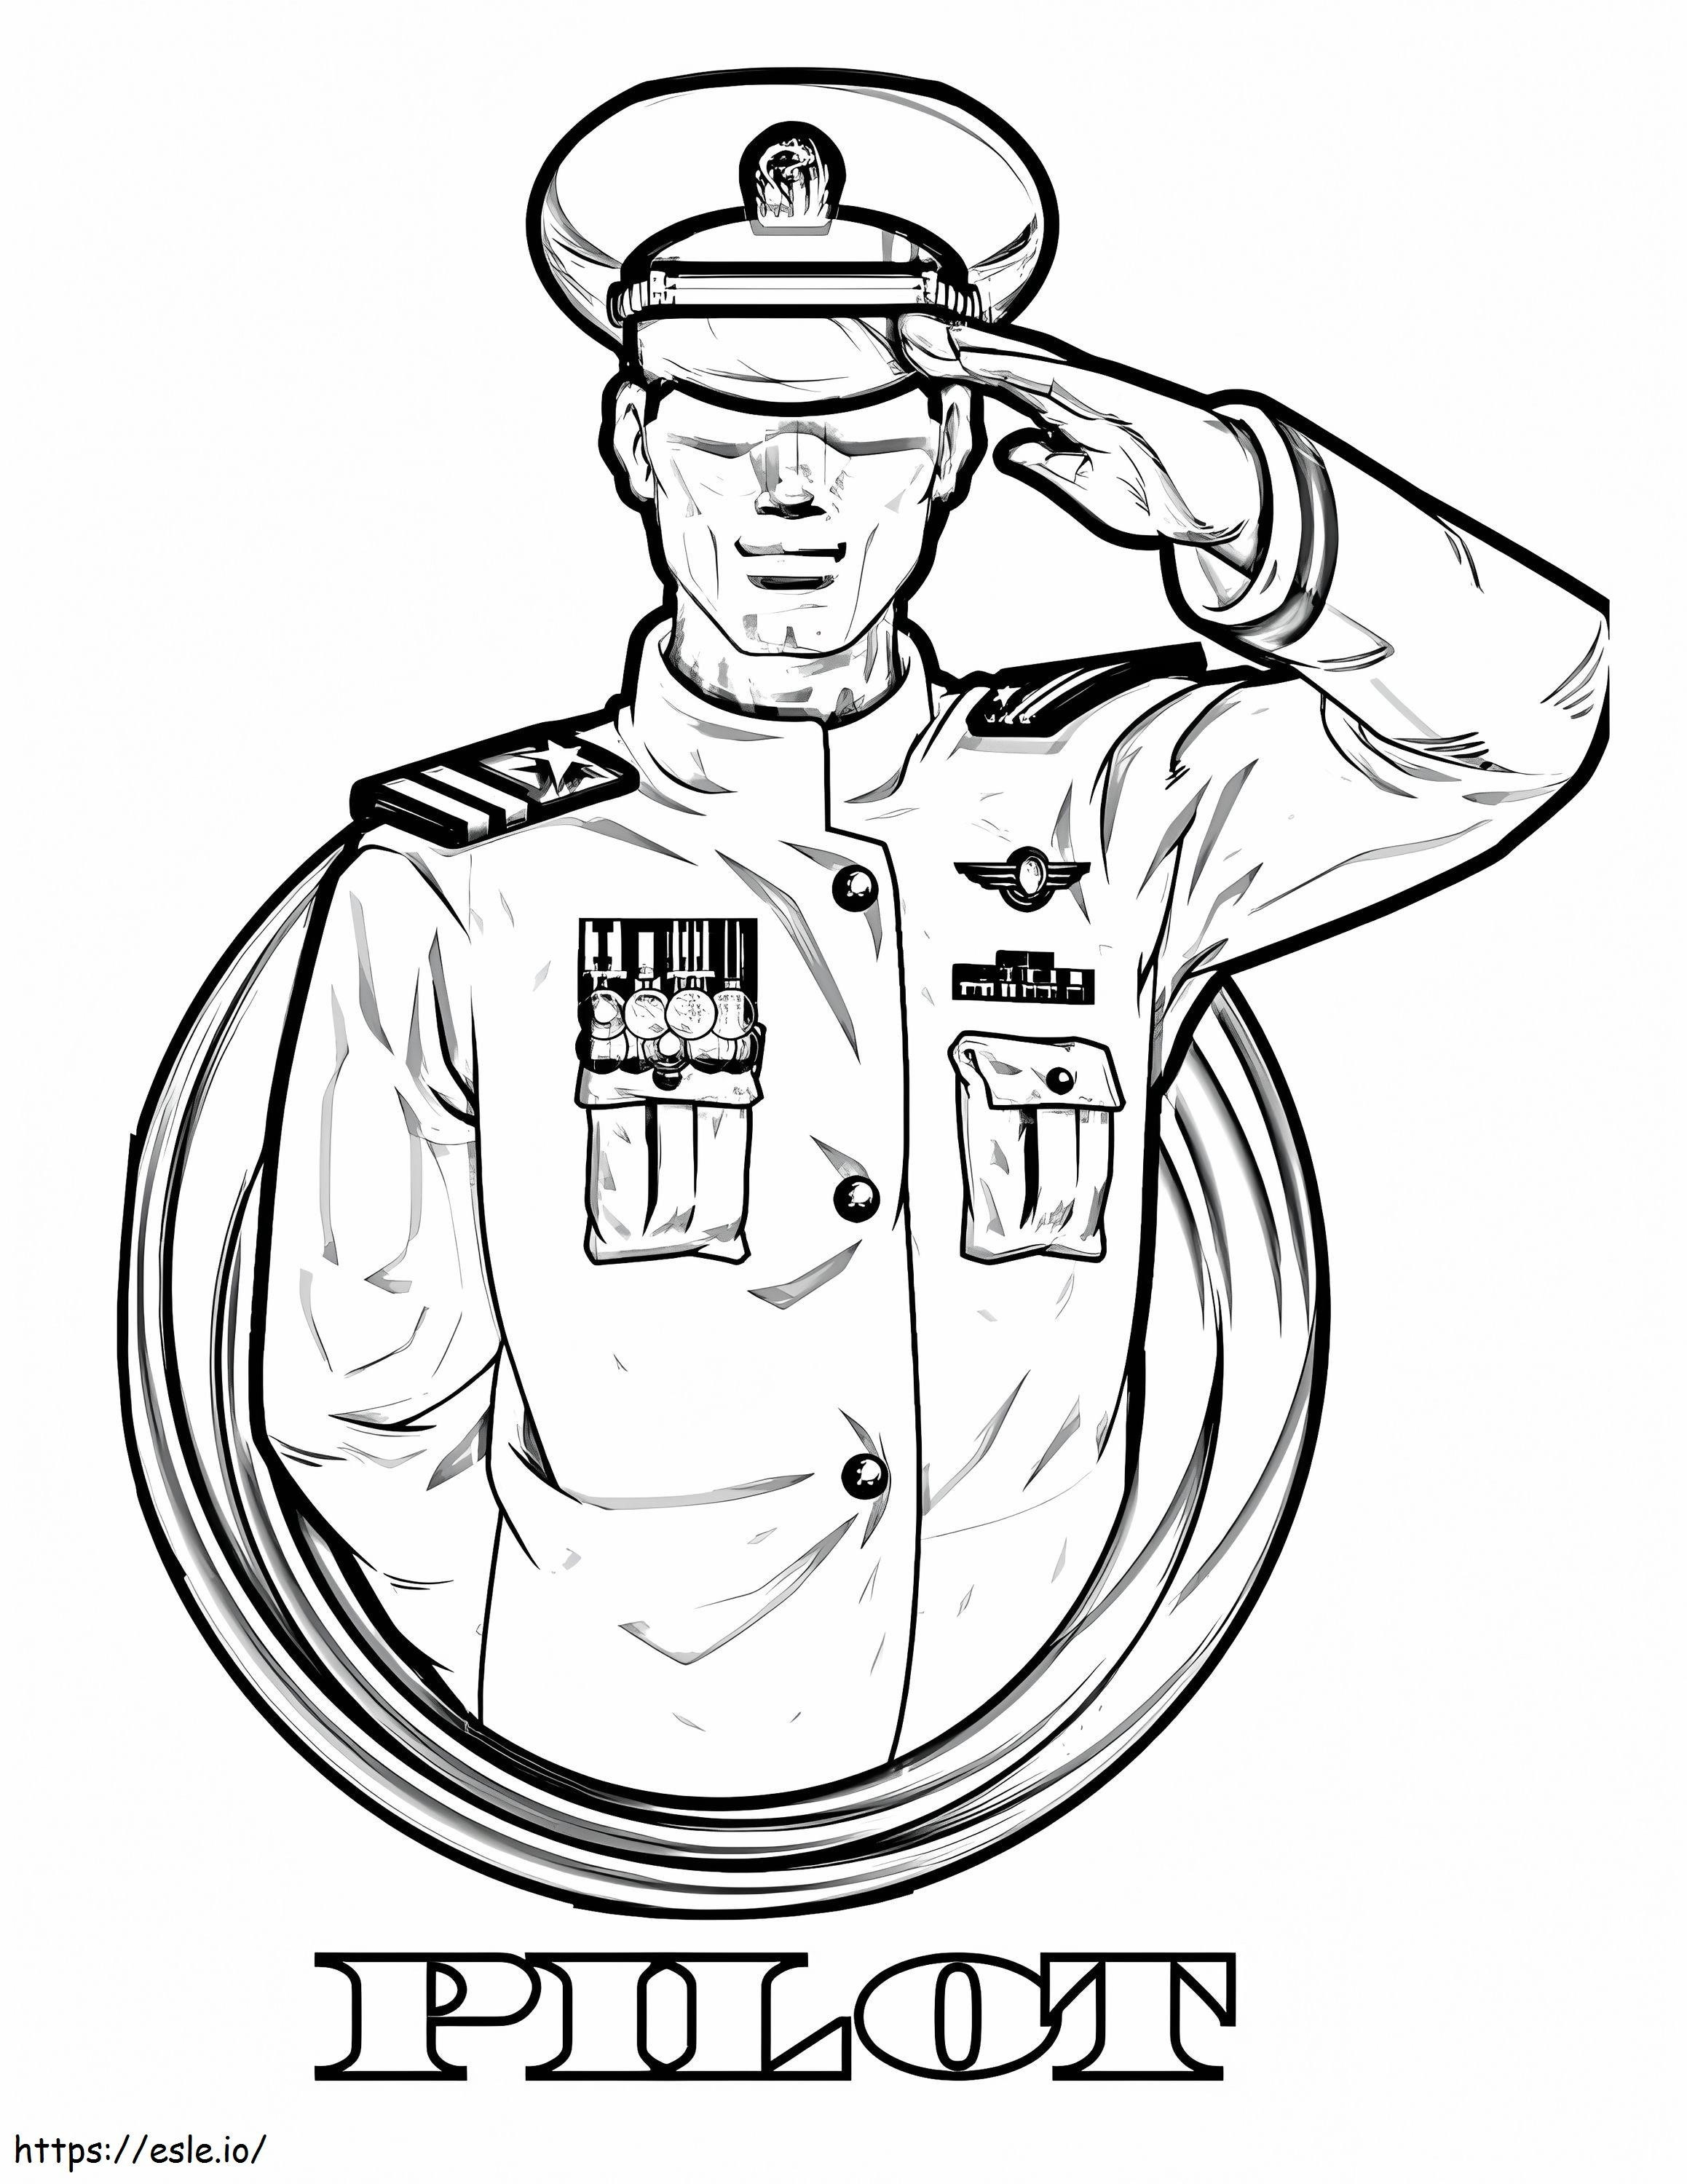 Cool Pilot coloring page